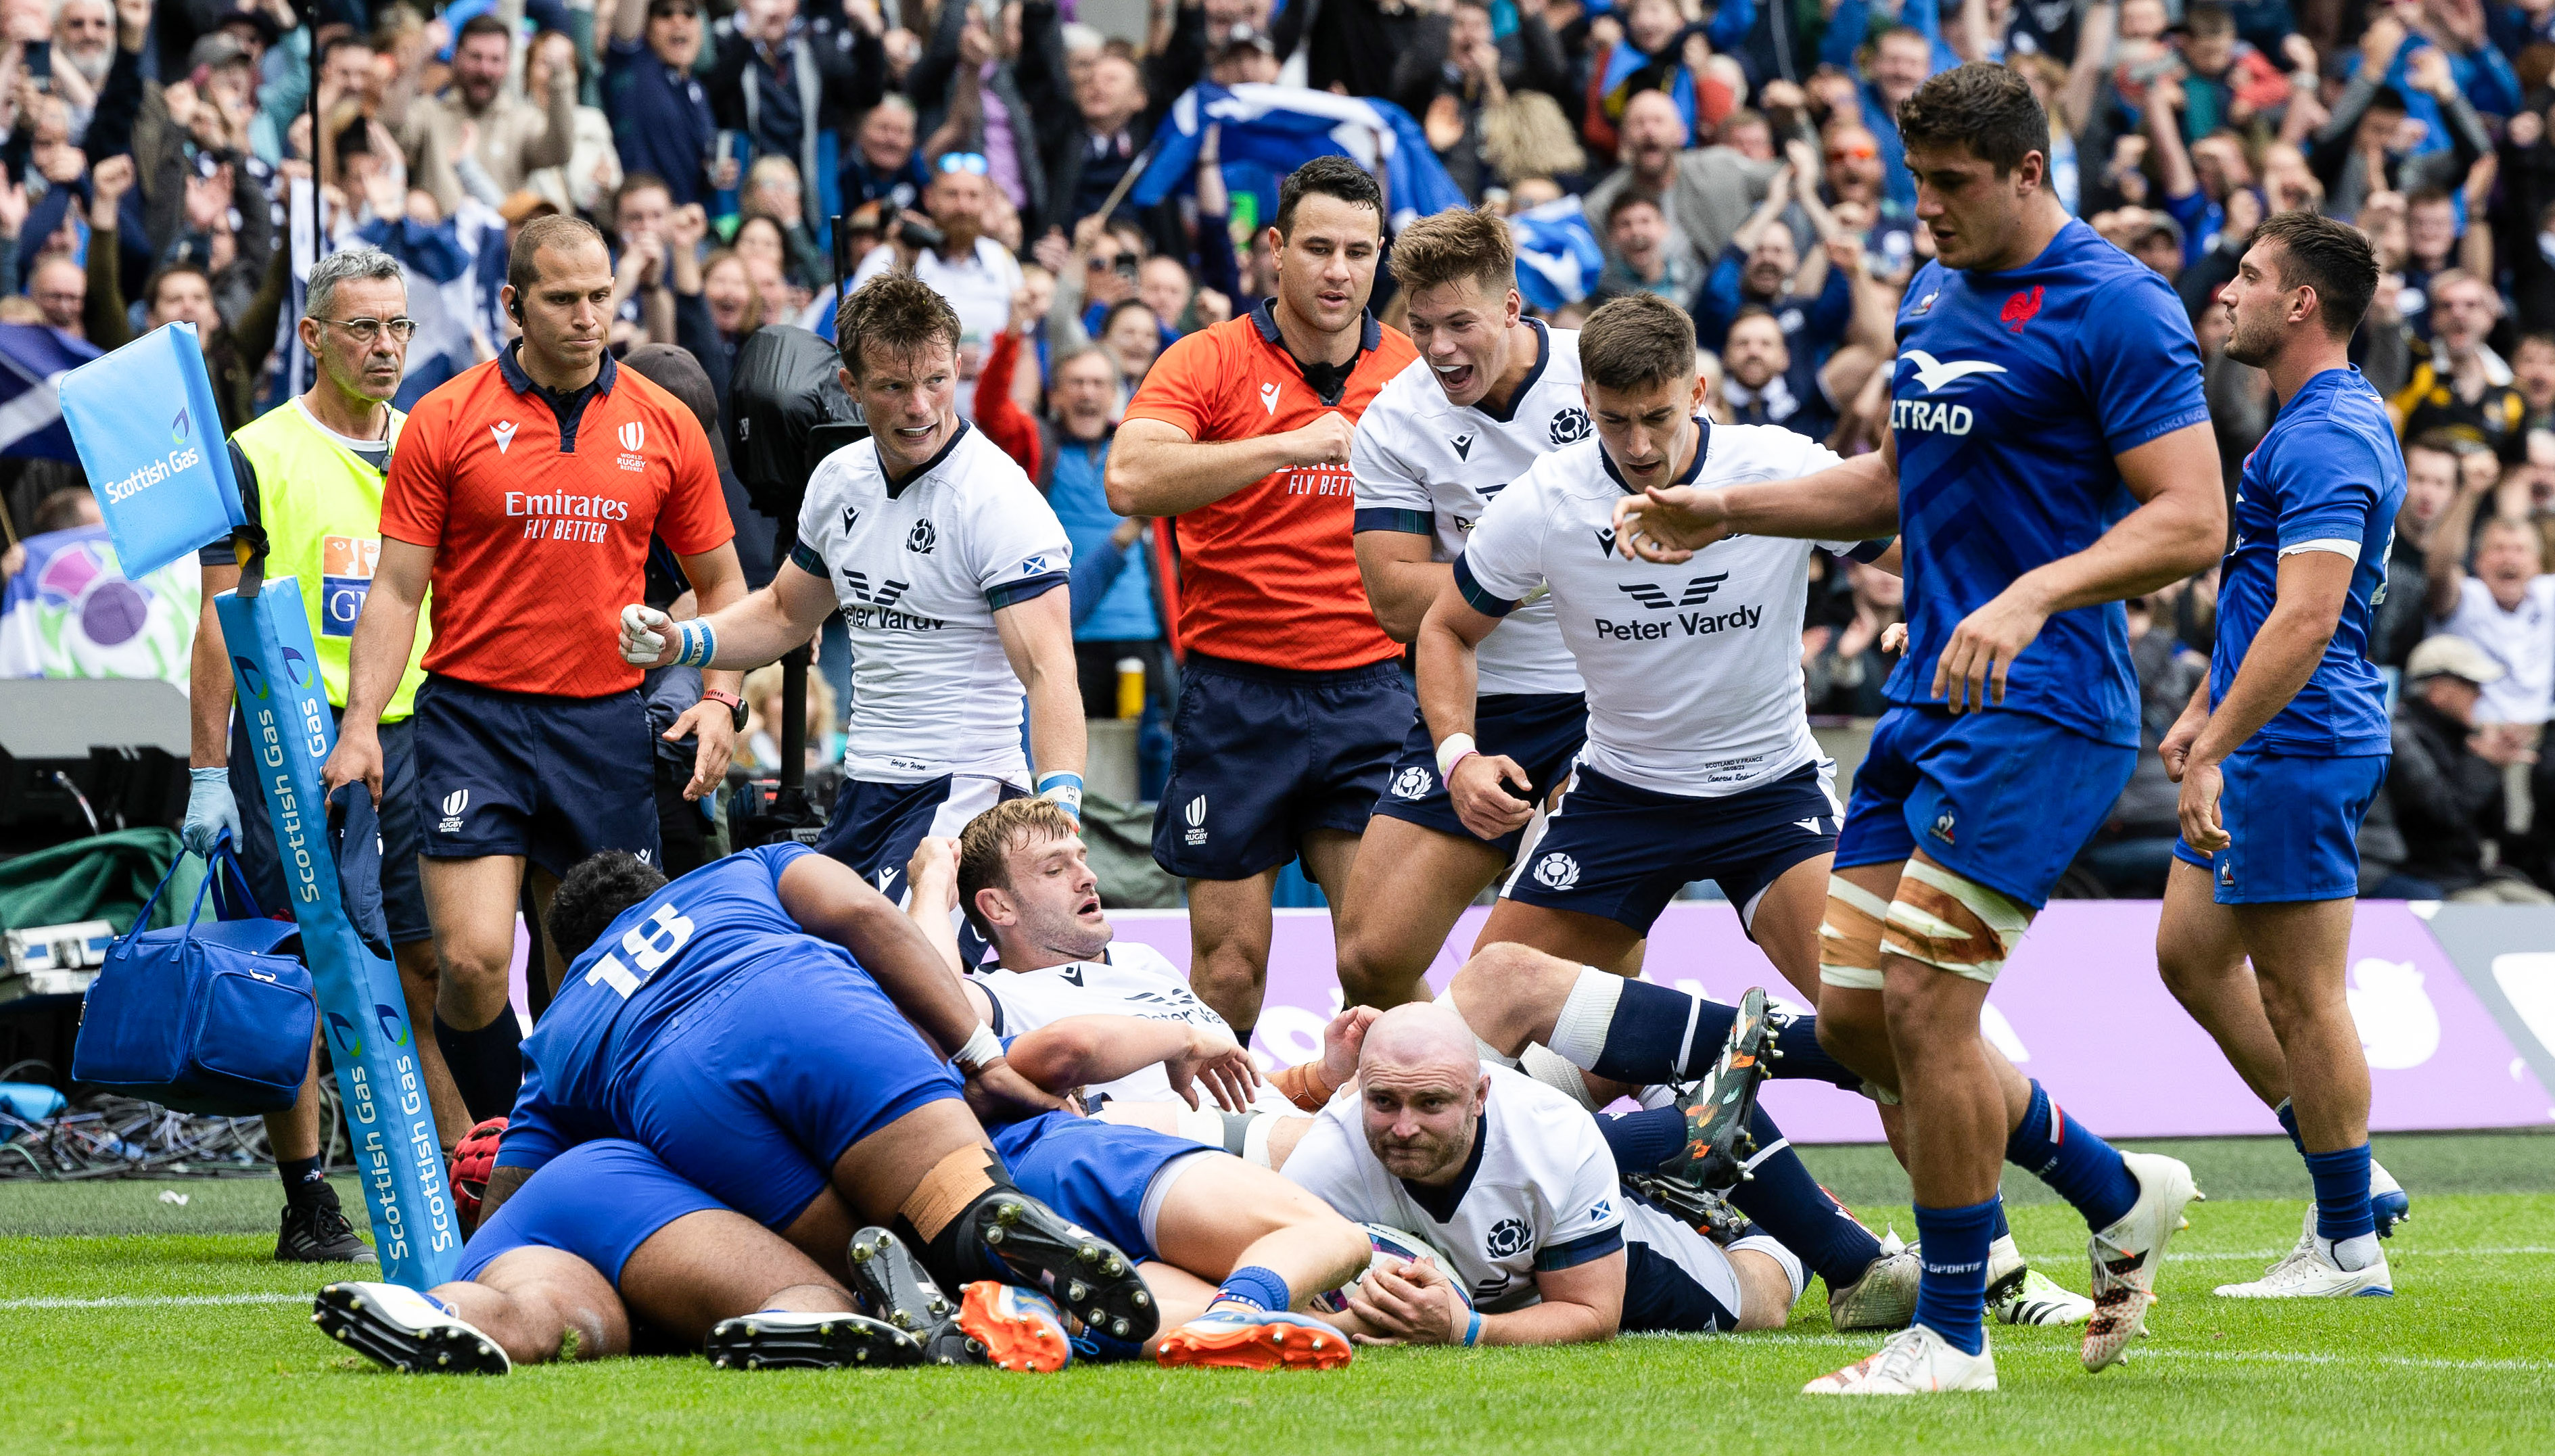 Reaction as 14-man Scotland rally to beat France - Live